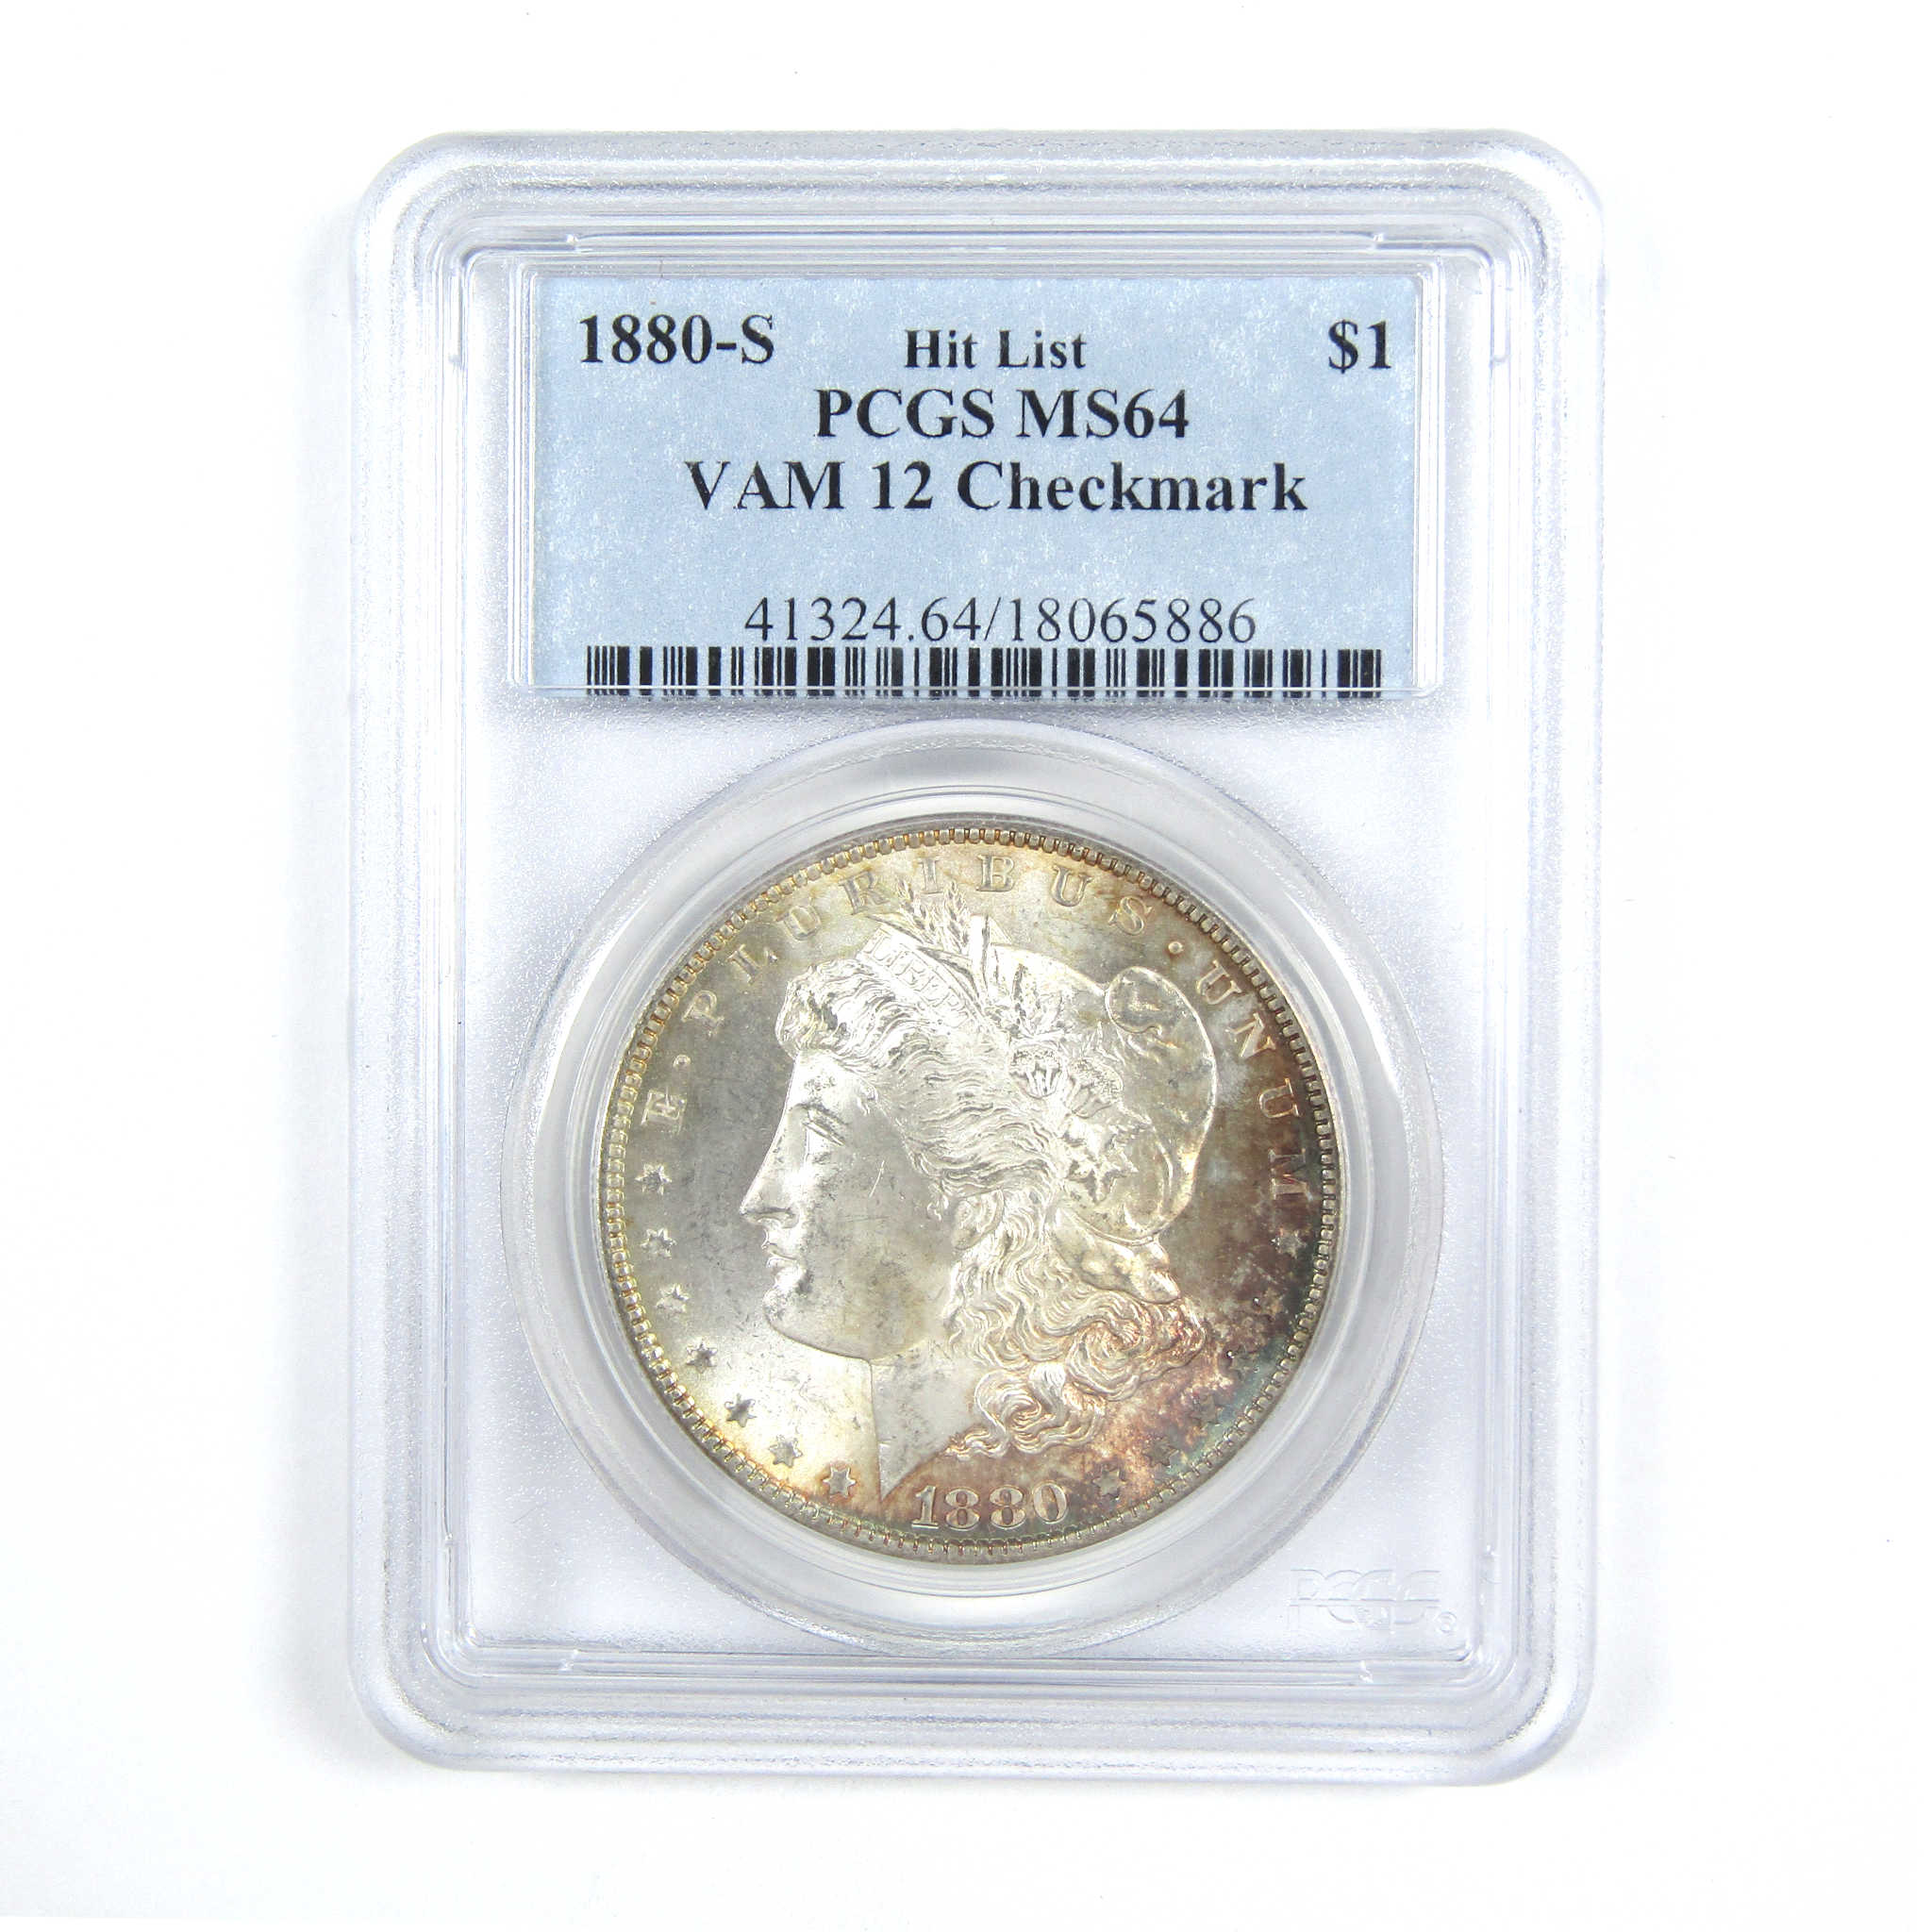 1880 S VAM-12 Checkmark Morgan Dollar MS 64 PCGS Silver $1 SKU:CPC7345 - Morgan coin - Morgan silver dollar - Morgan silver dollar for sale - Profile Coins &amp; Collectibles